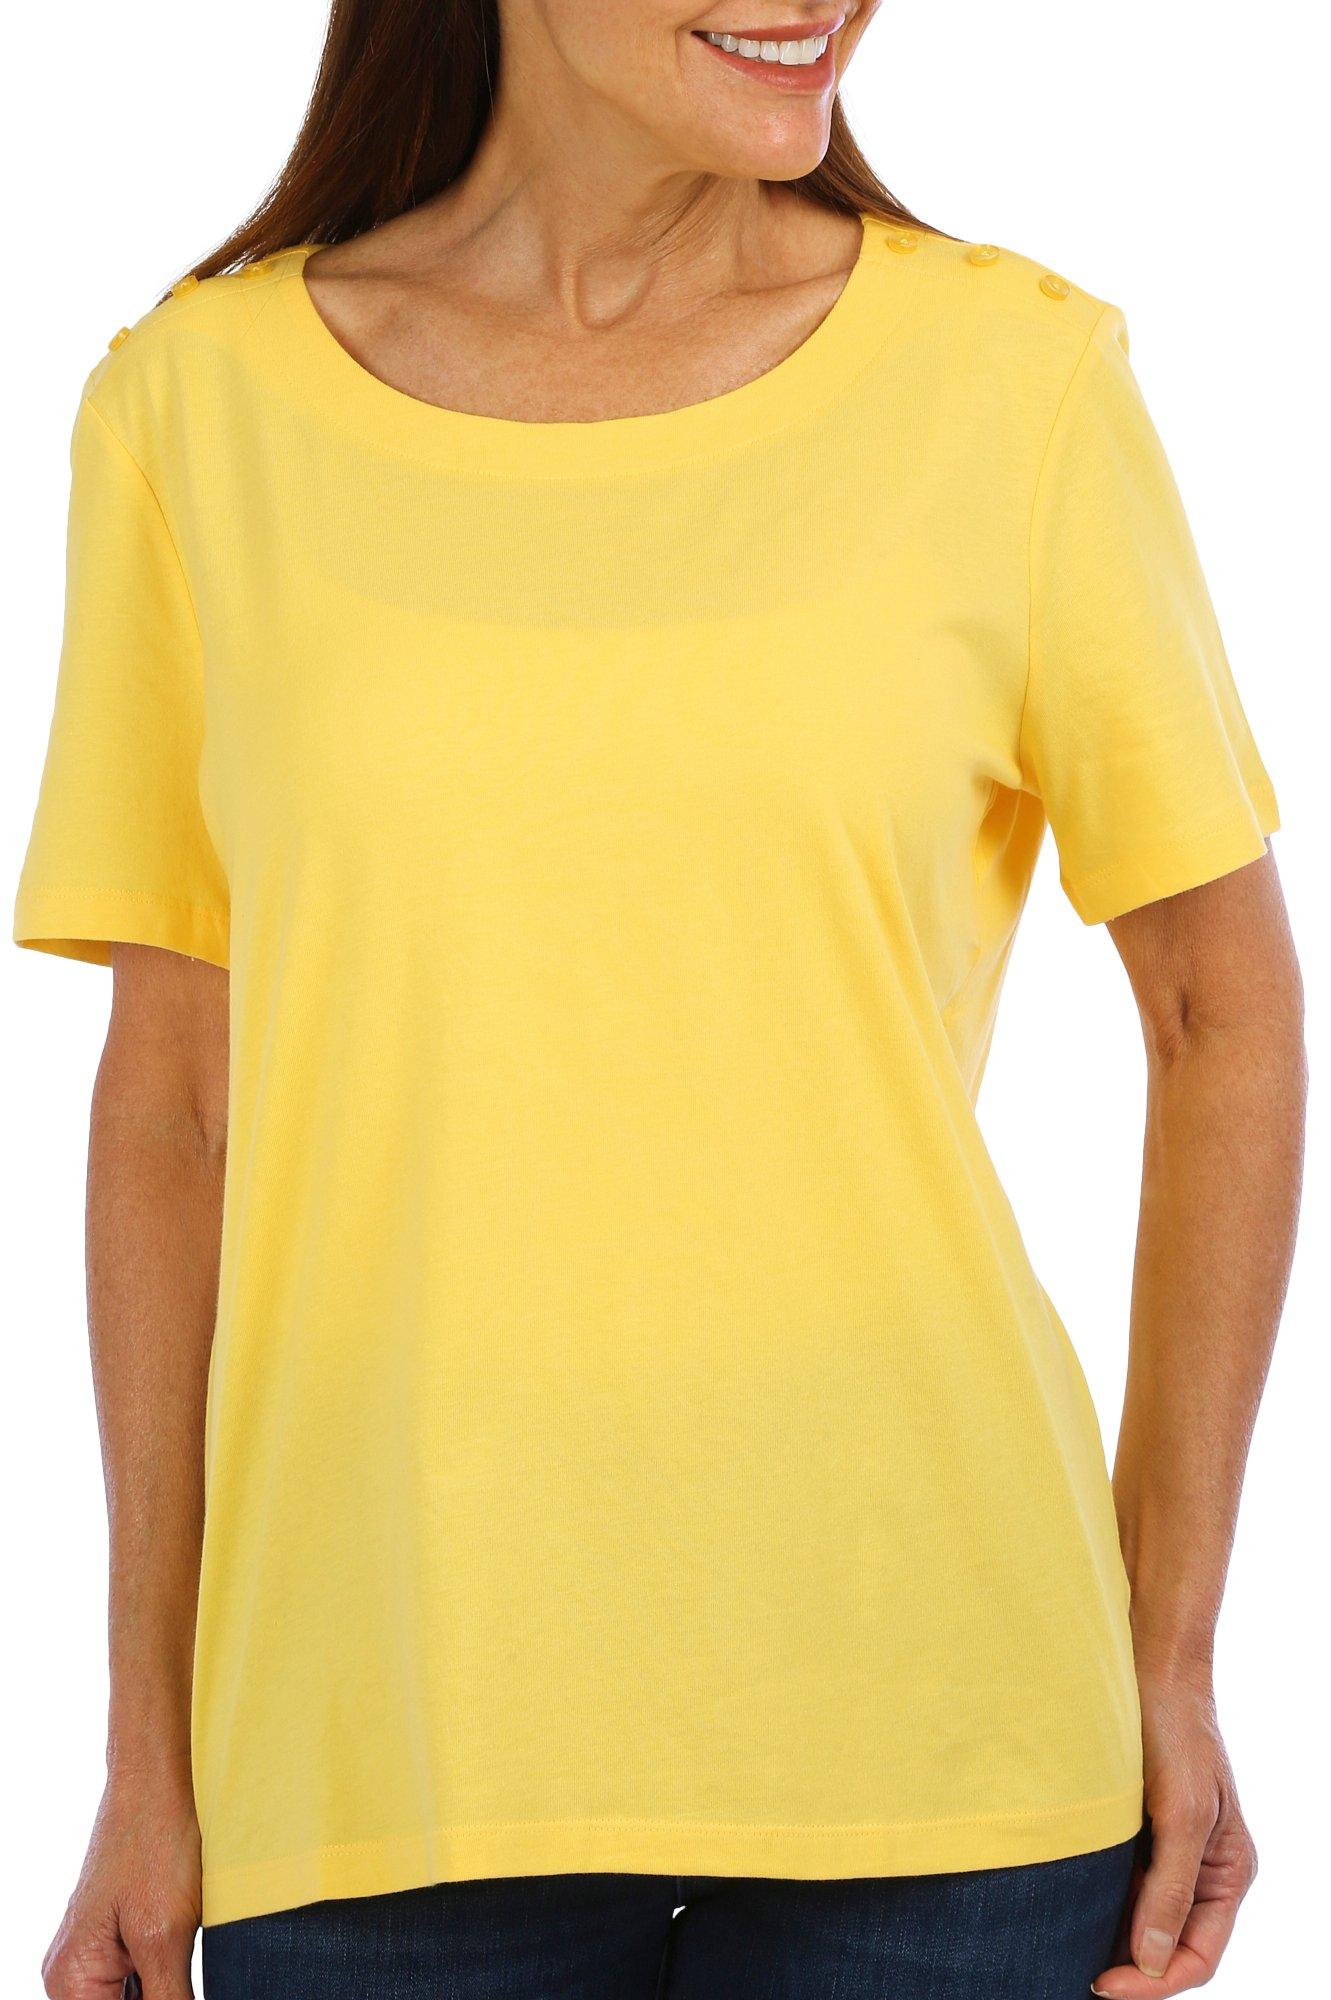 Coral Bay Petite Solid Button Accent Short Sleeve Top